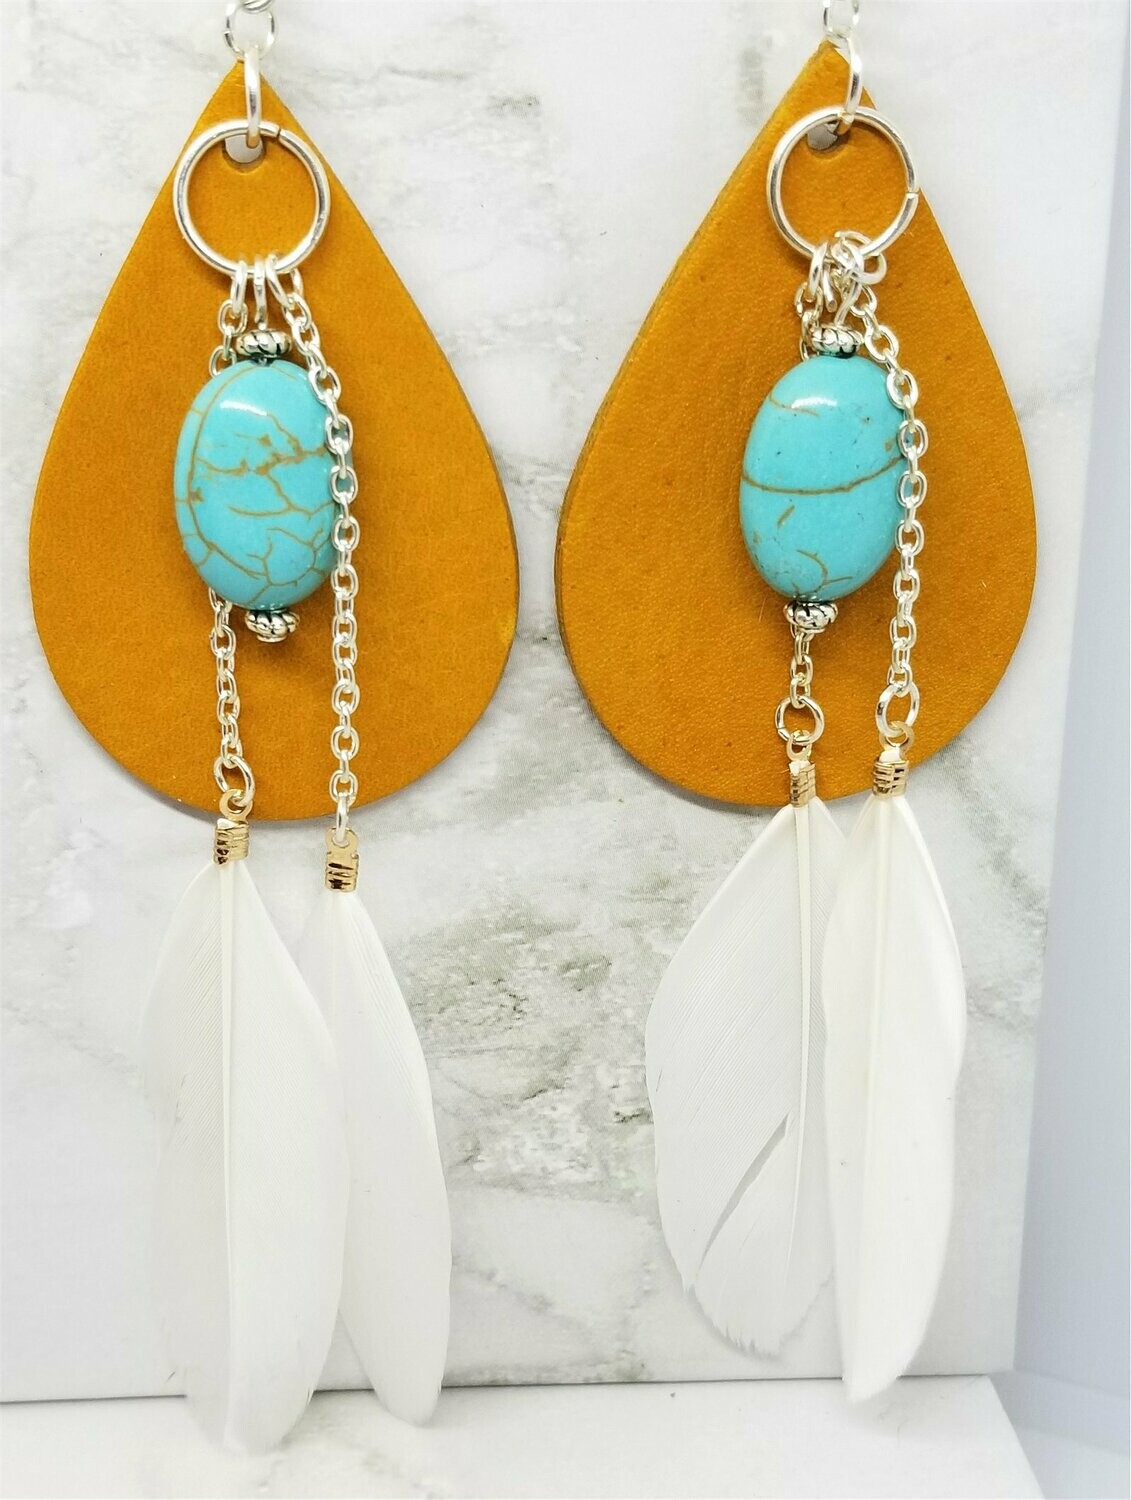 Southwestern Inspired Tan Leather Earrings with Turquoise Magnesite and White Feather Dangles